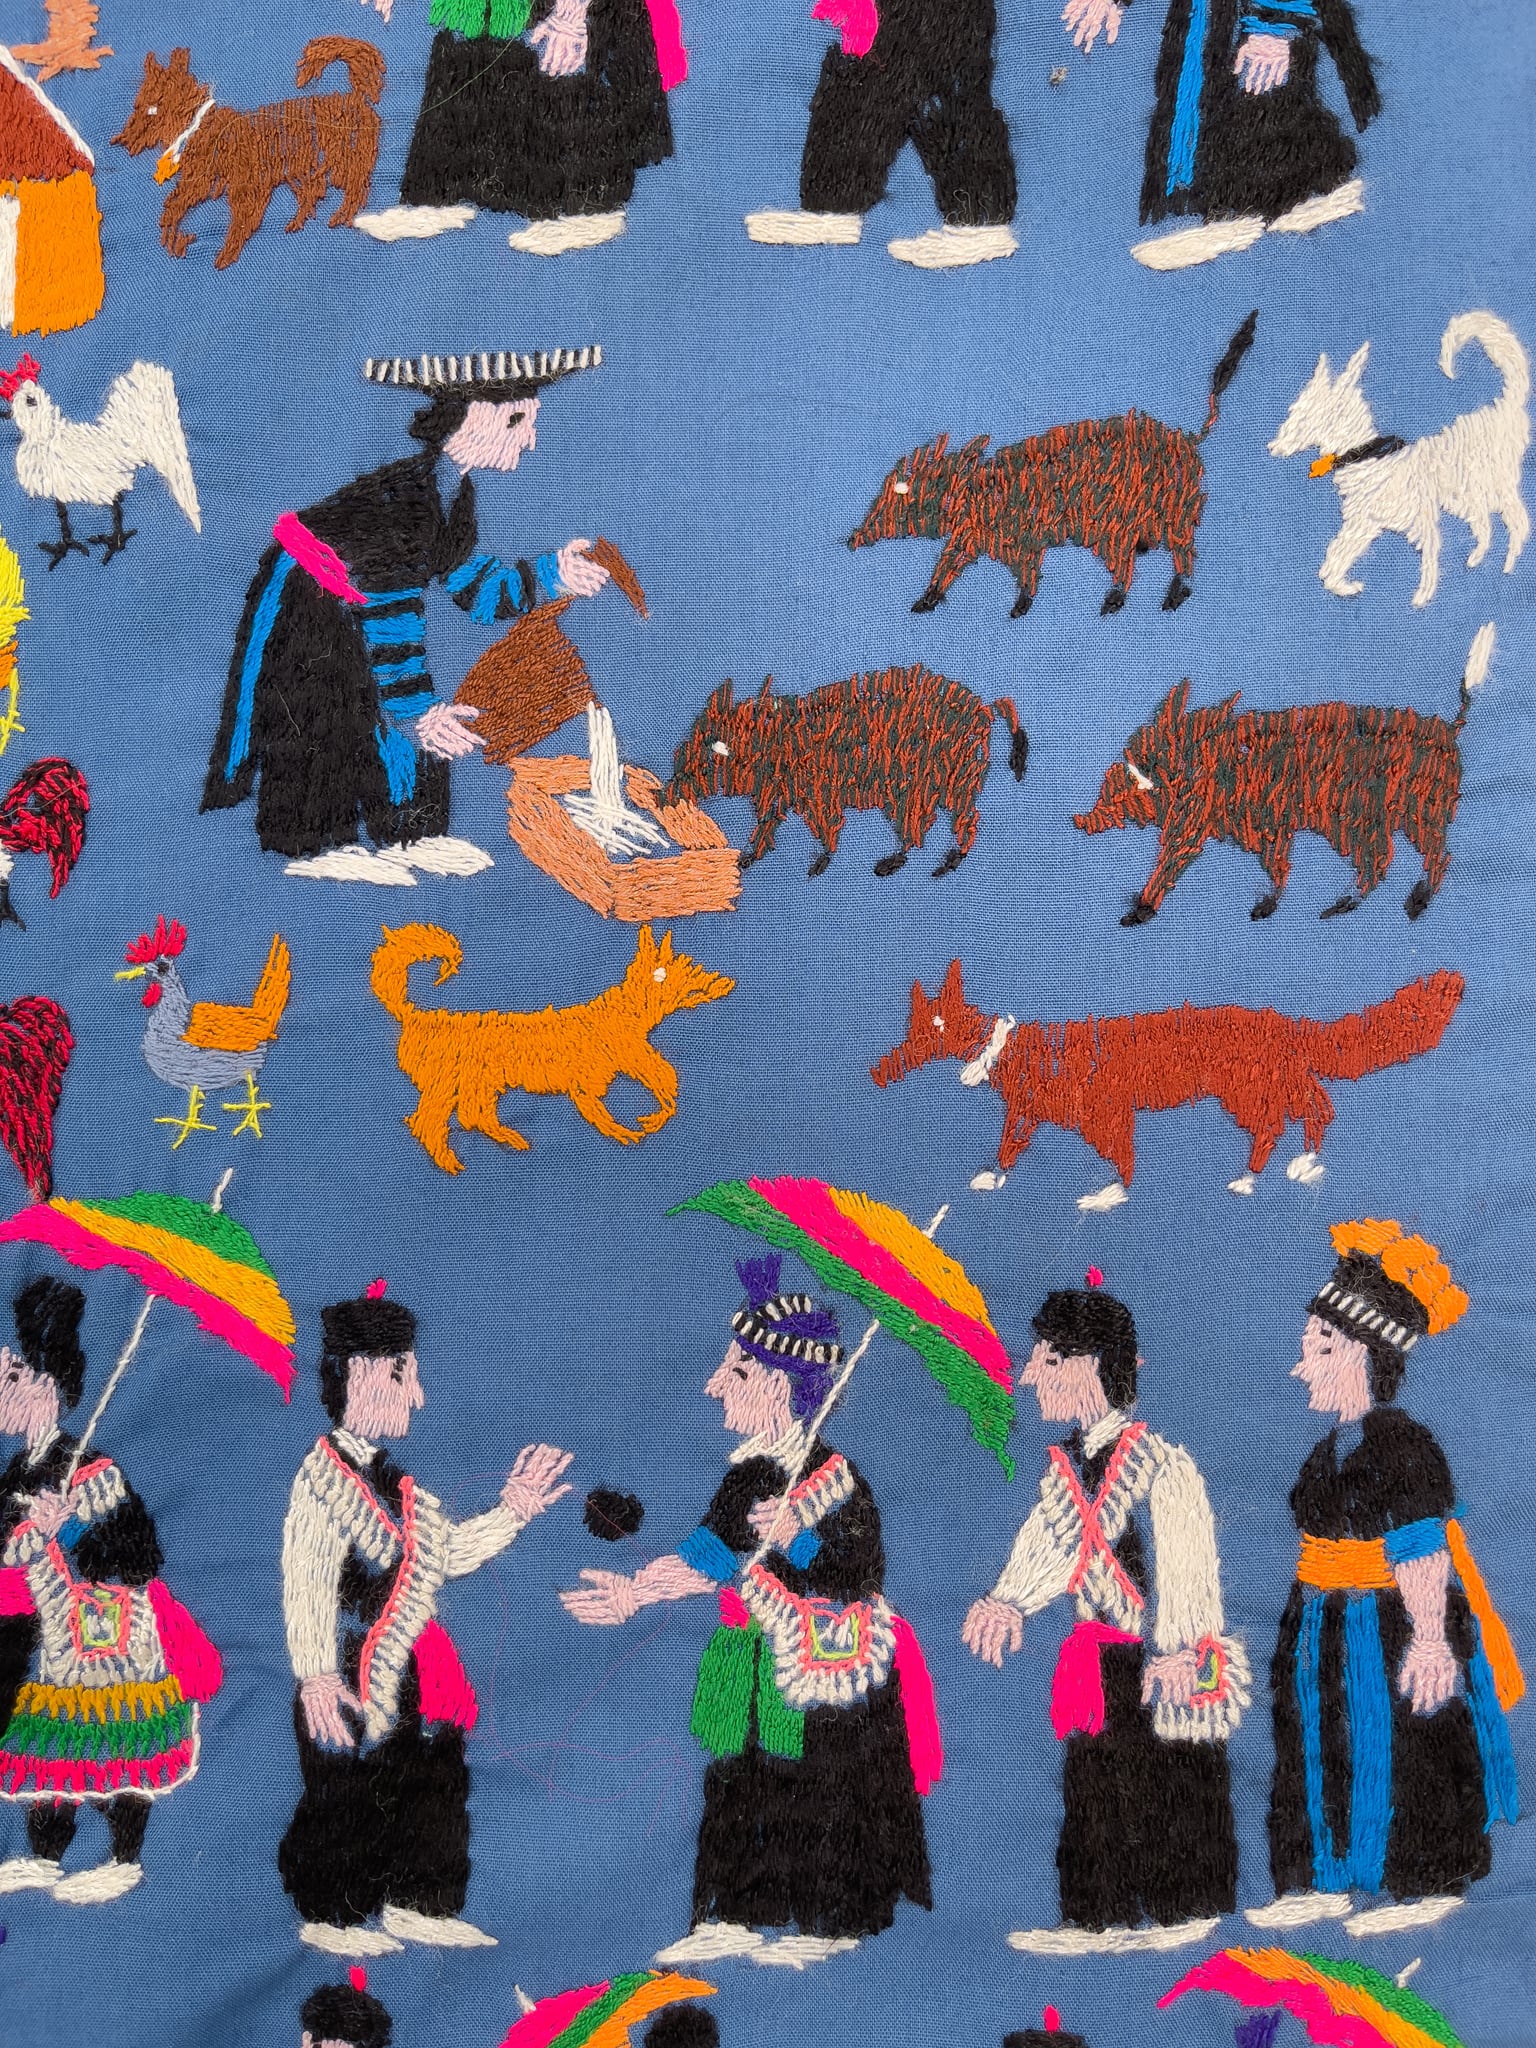 Artist unknown, Hmong New Year Scene Story Cloth, Craft in America